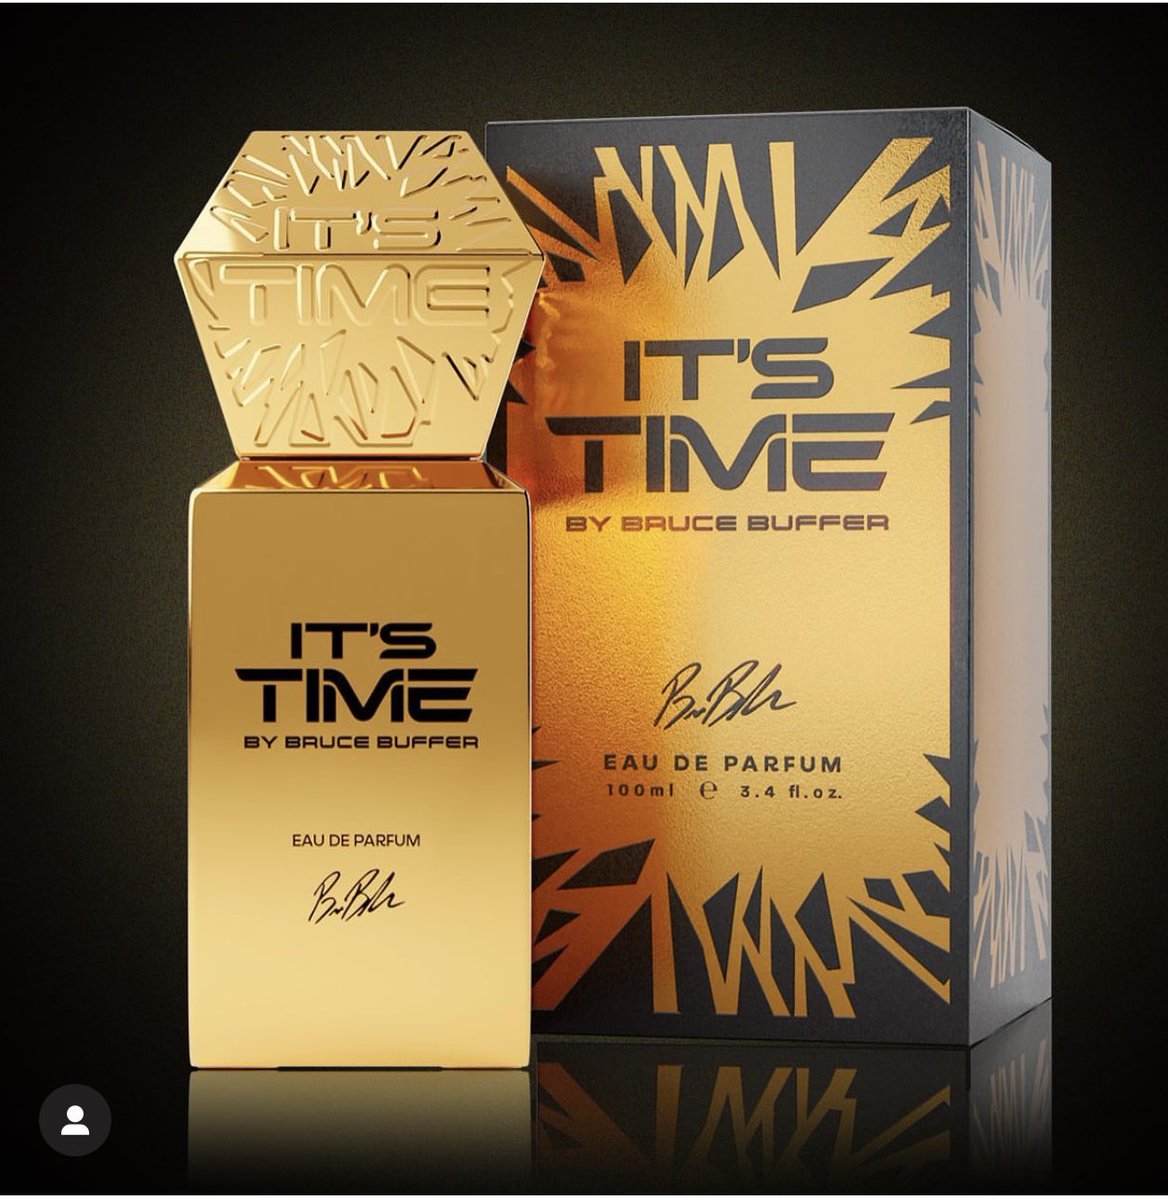 🗣️🎙️Smell like a Champion with IT'S TIME COLOGNE 👊 The perfect Holiday gift 🎄🕎 🎅🏼 for the Man with charisma & true Warrior Spirt!!! Order this top selling cologne on AMAZON now while stocks last 👊@itstimebb 👊 AMAZON ORDER LINK IS: a.co/d/hzkVIx2